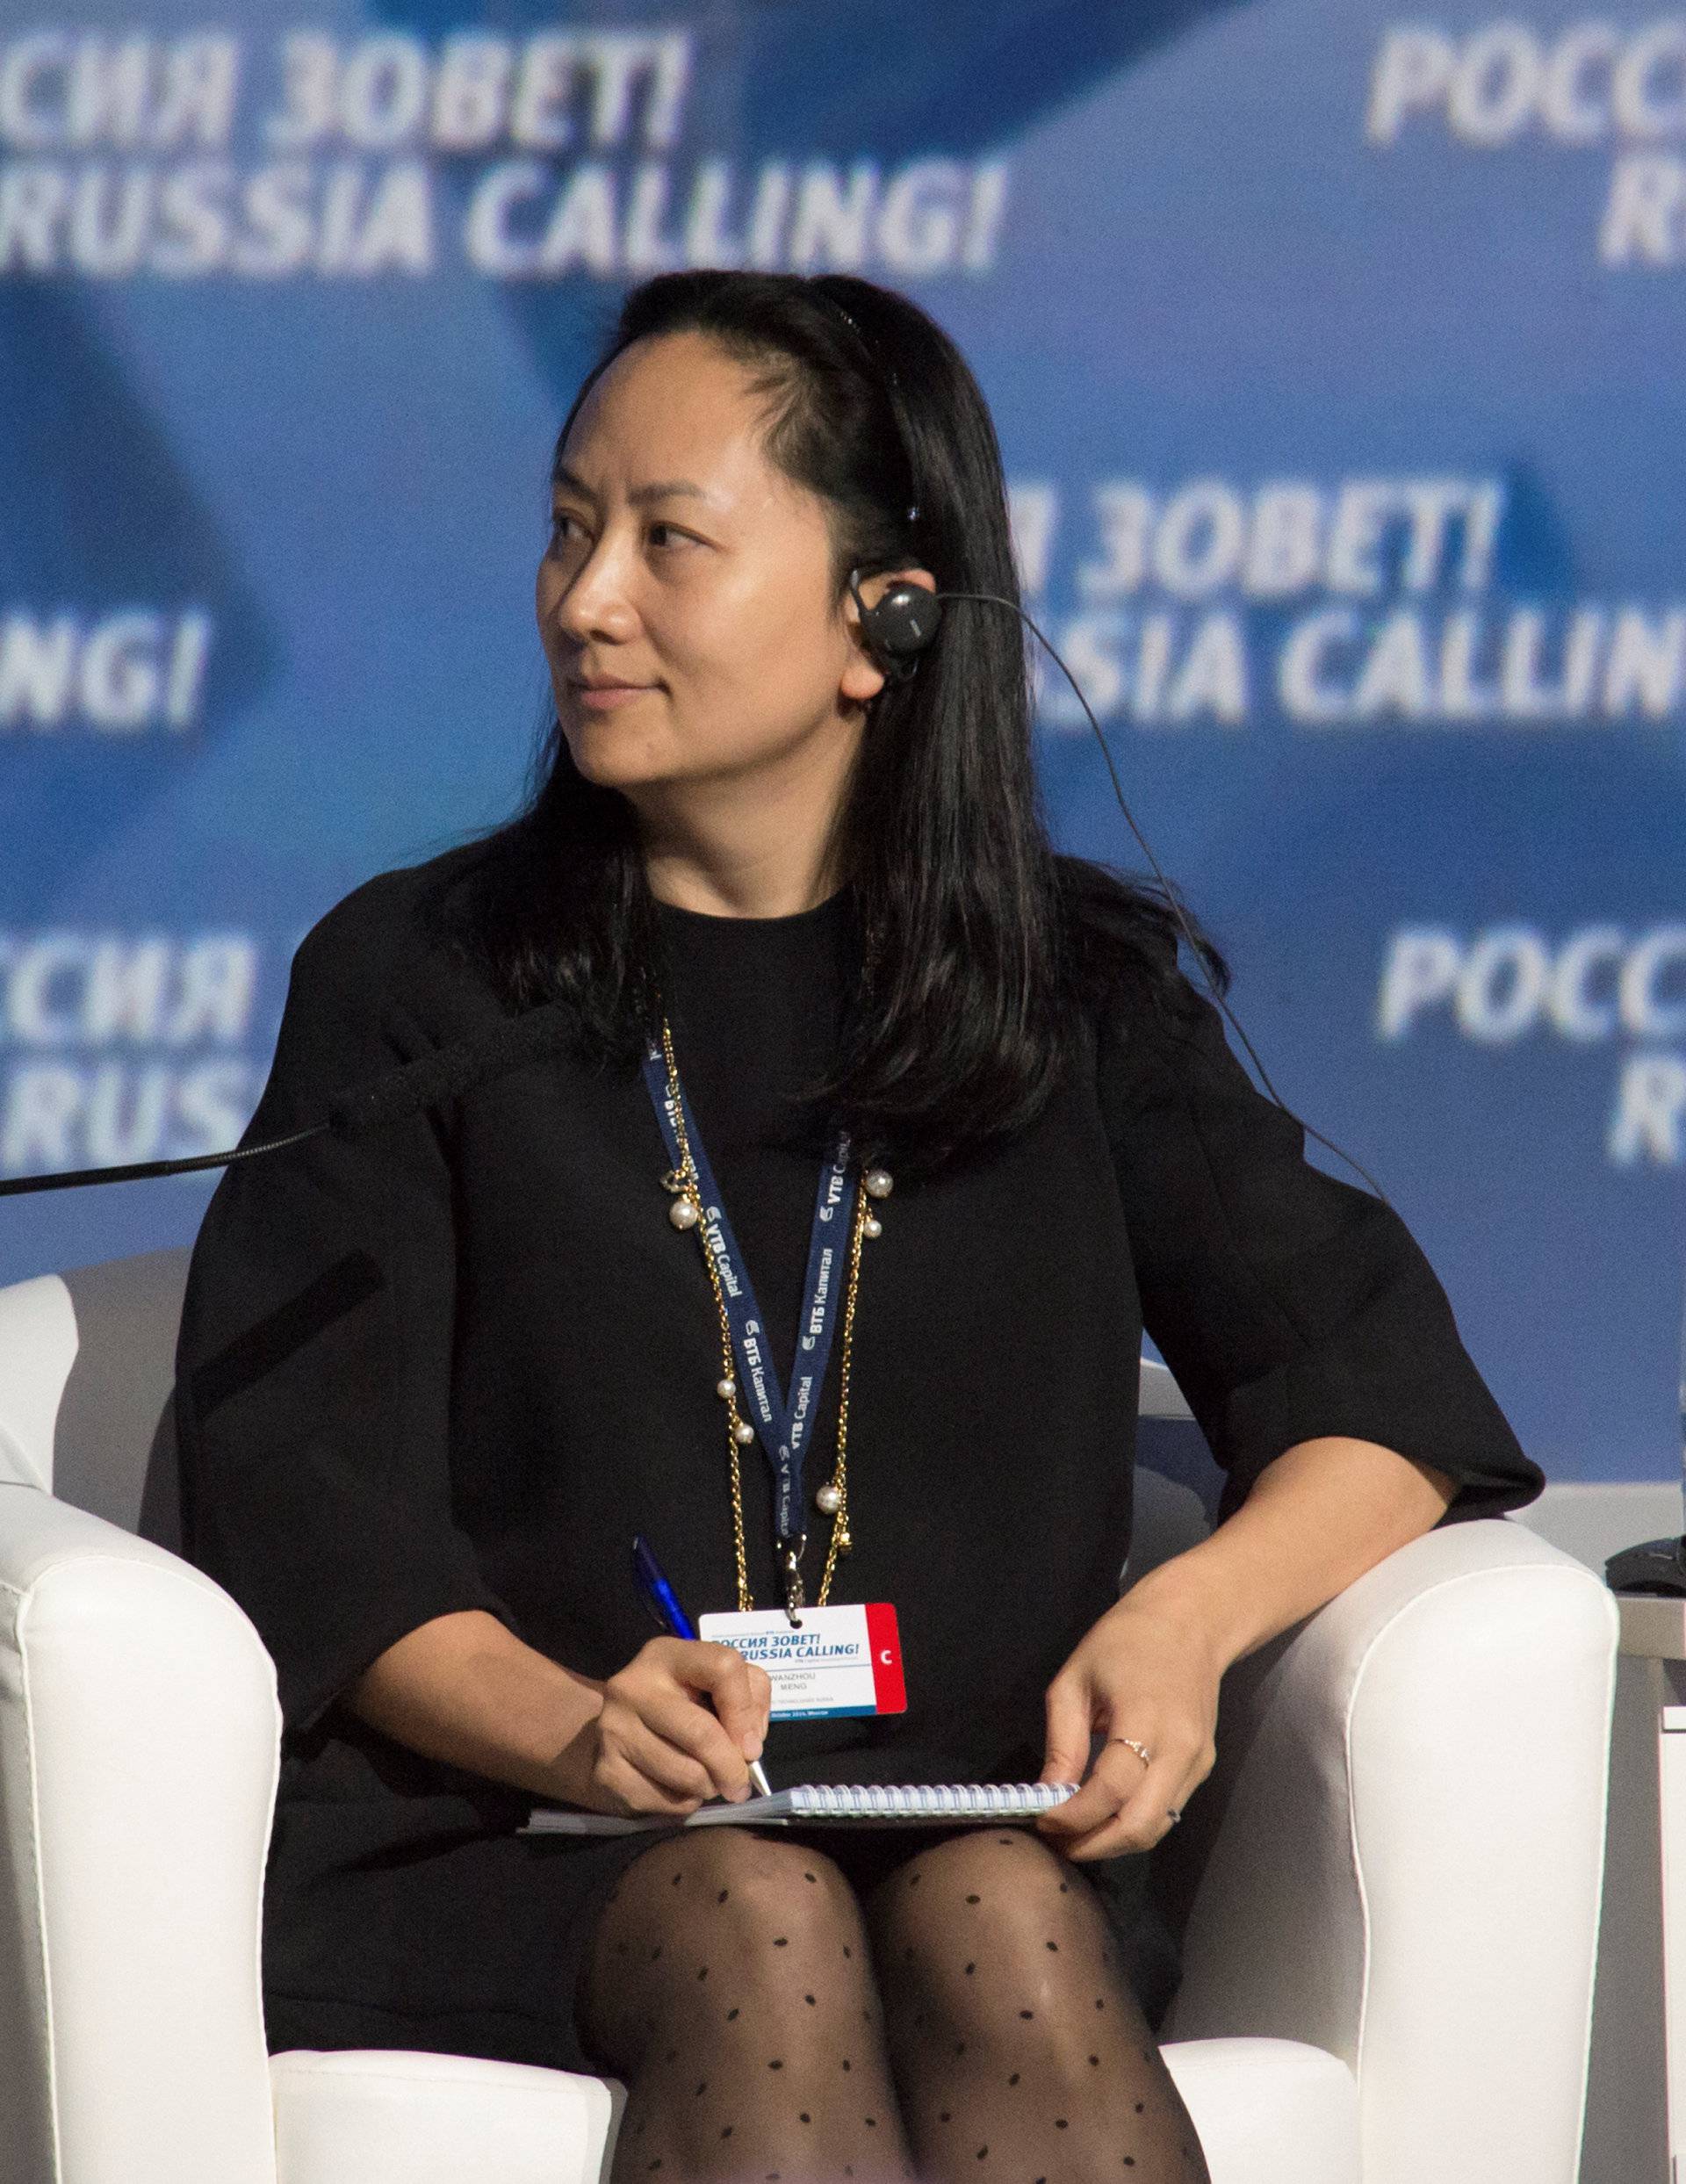 Huawei's Executive Board Director Meng Wanzhou attends the VTB Capital Investment Forum "Russia Calling!" in Moscow